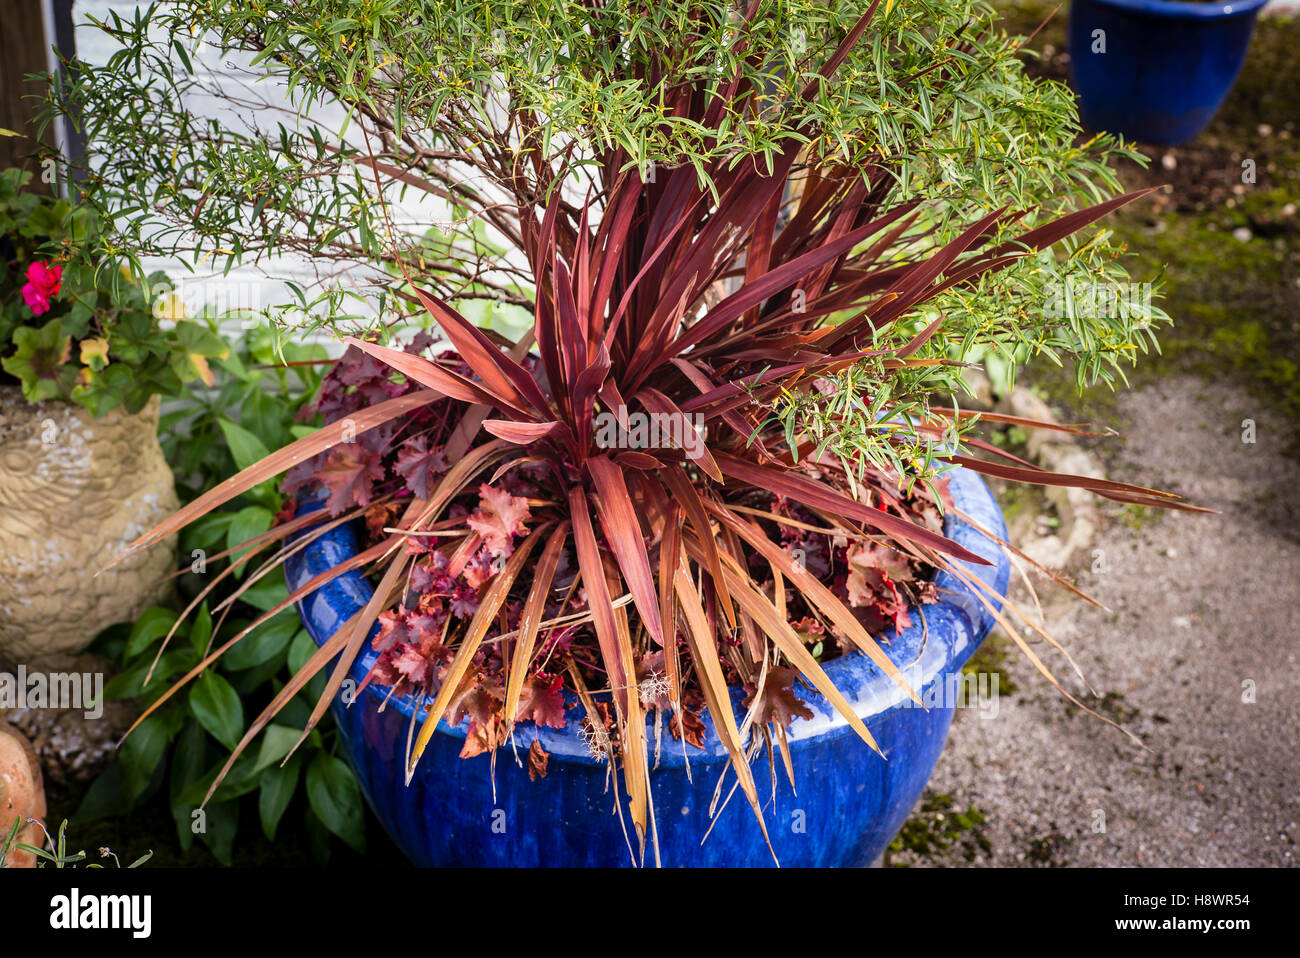 Regrowth of cordyline foliage after a servere winter frost many months earlier Stock Photo